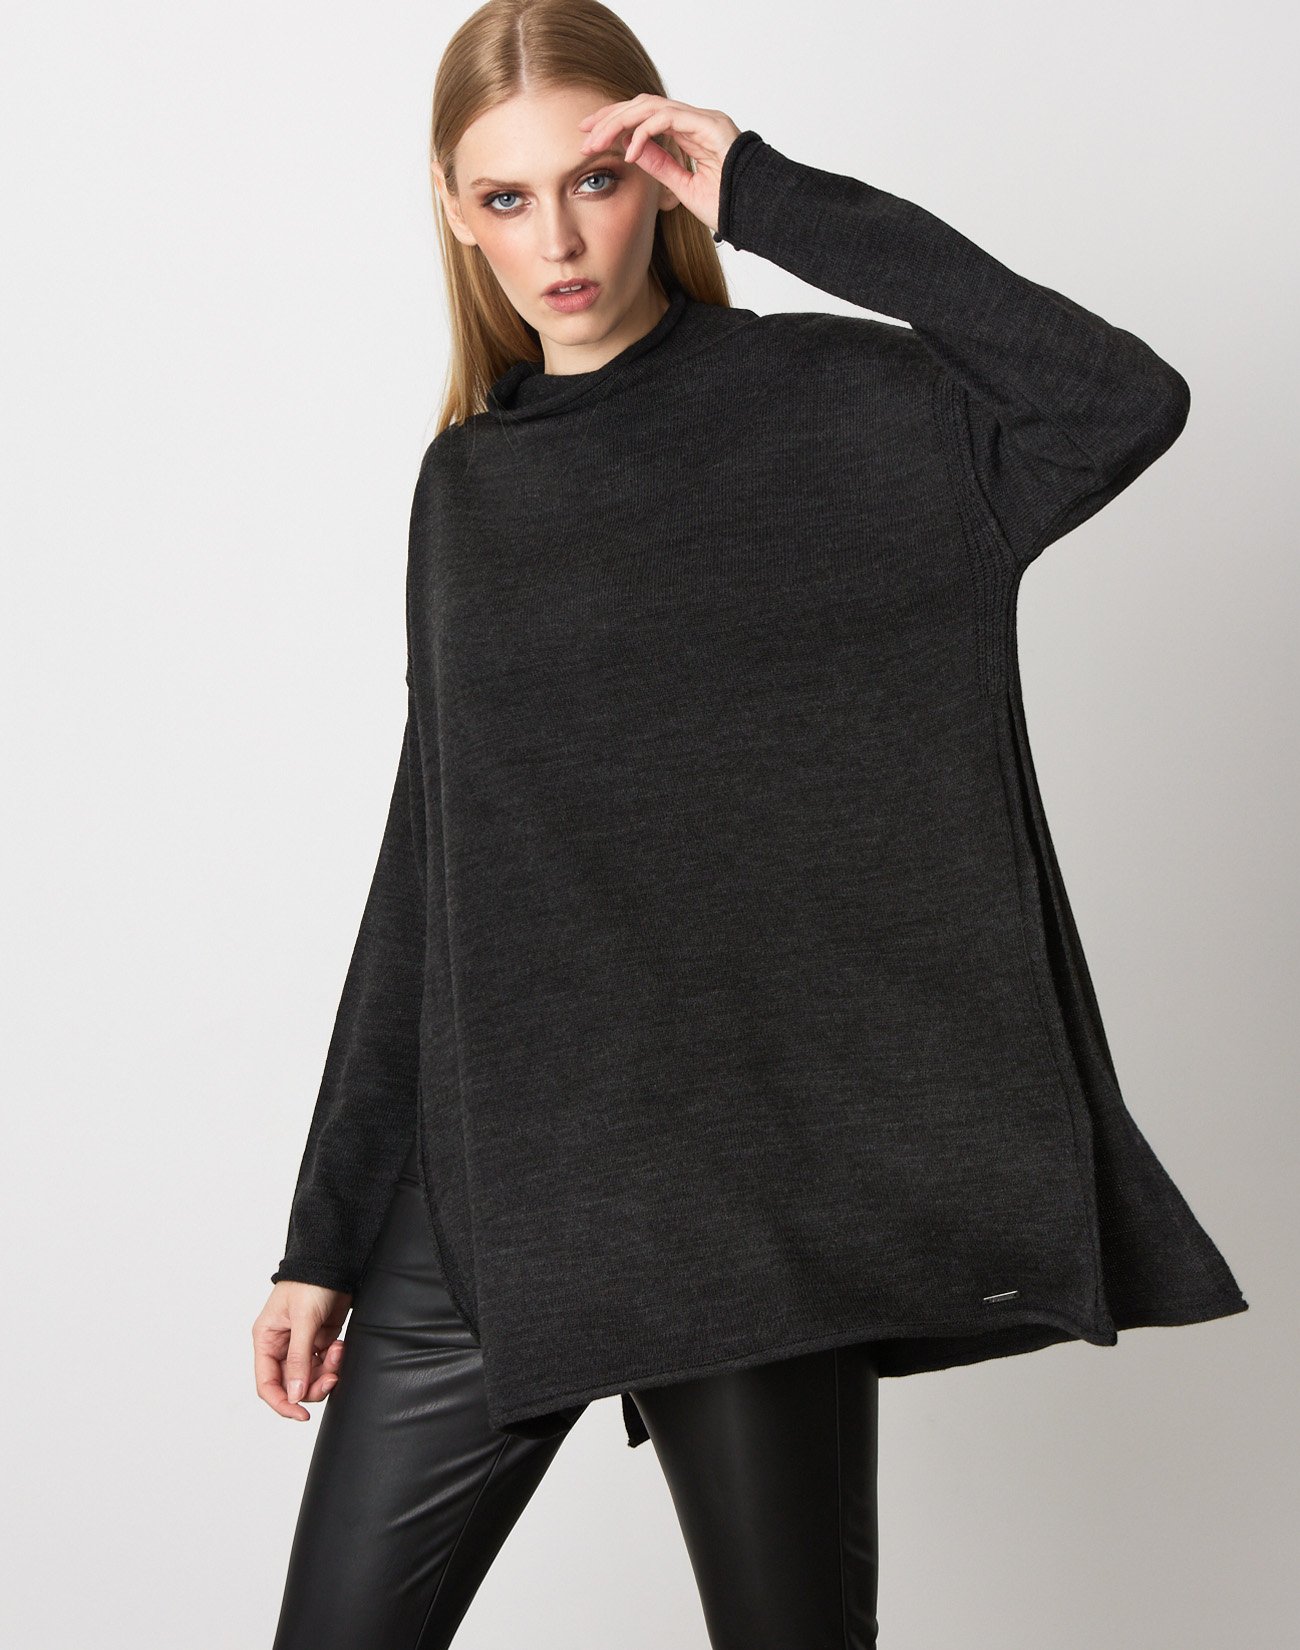 Knit top with high neck